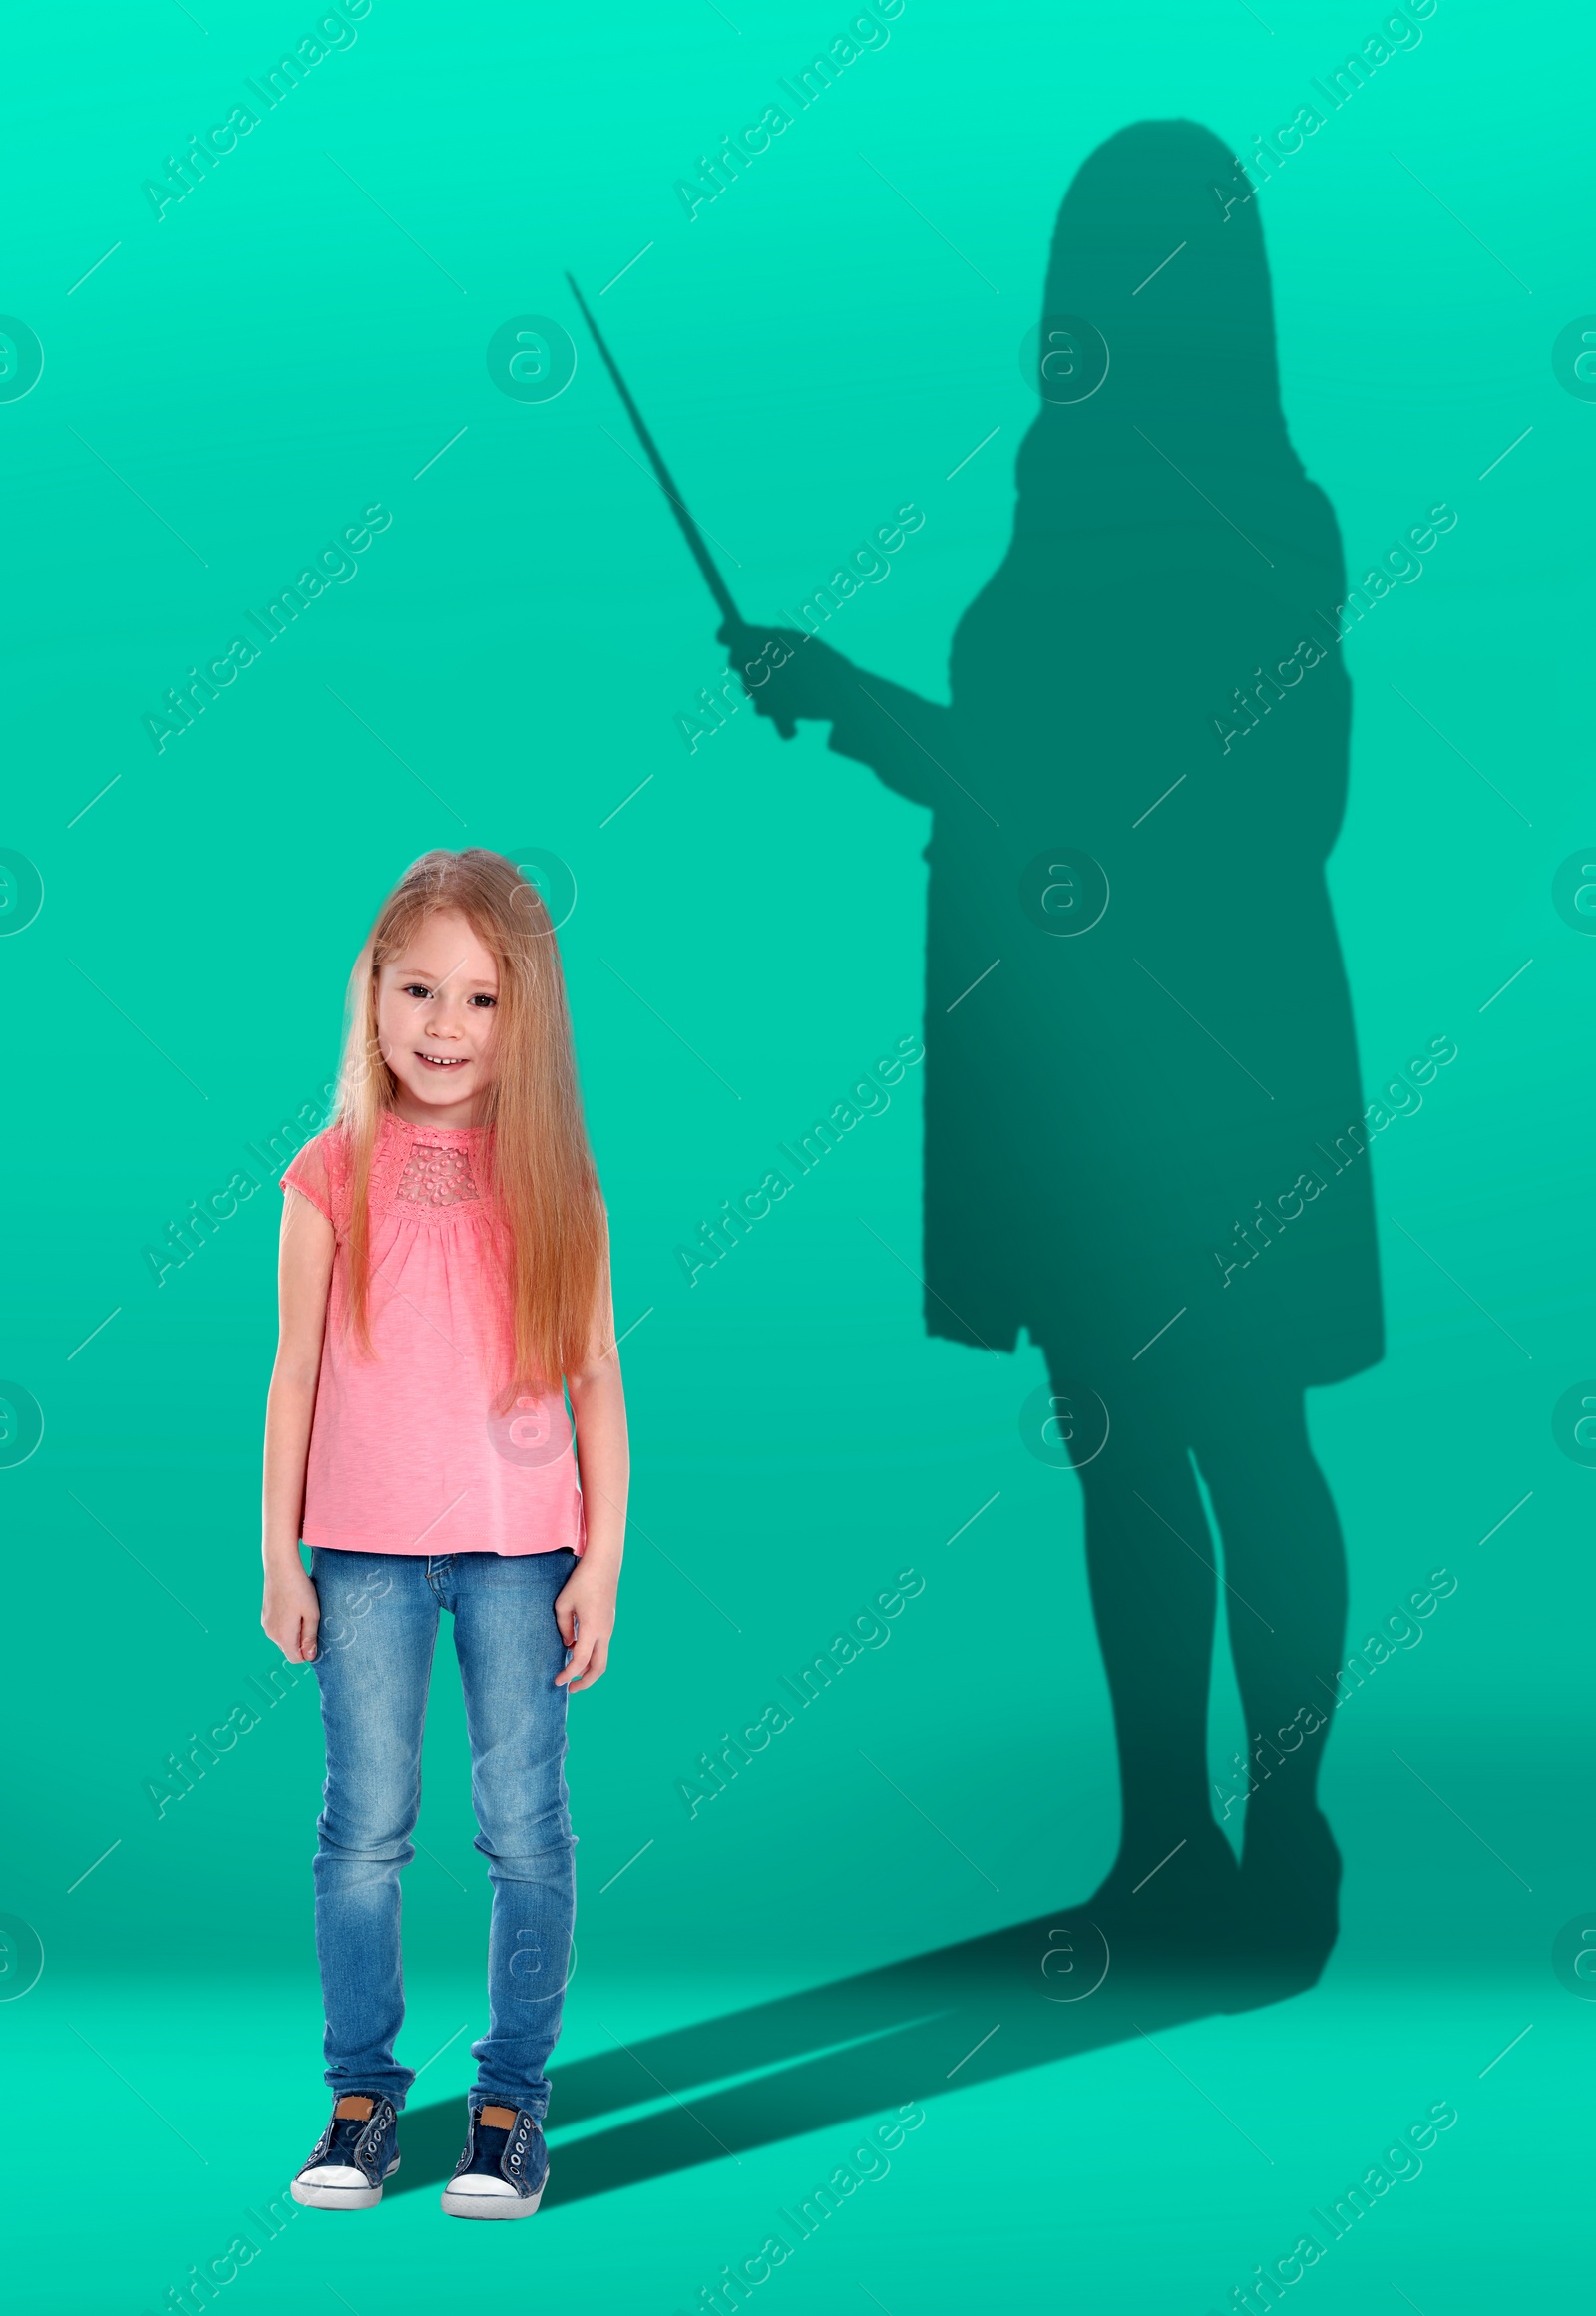 Image of Dream about future occupation. Smiling girl and silhouette of teacher on turquoise background